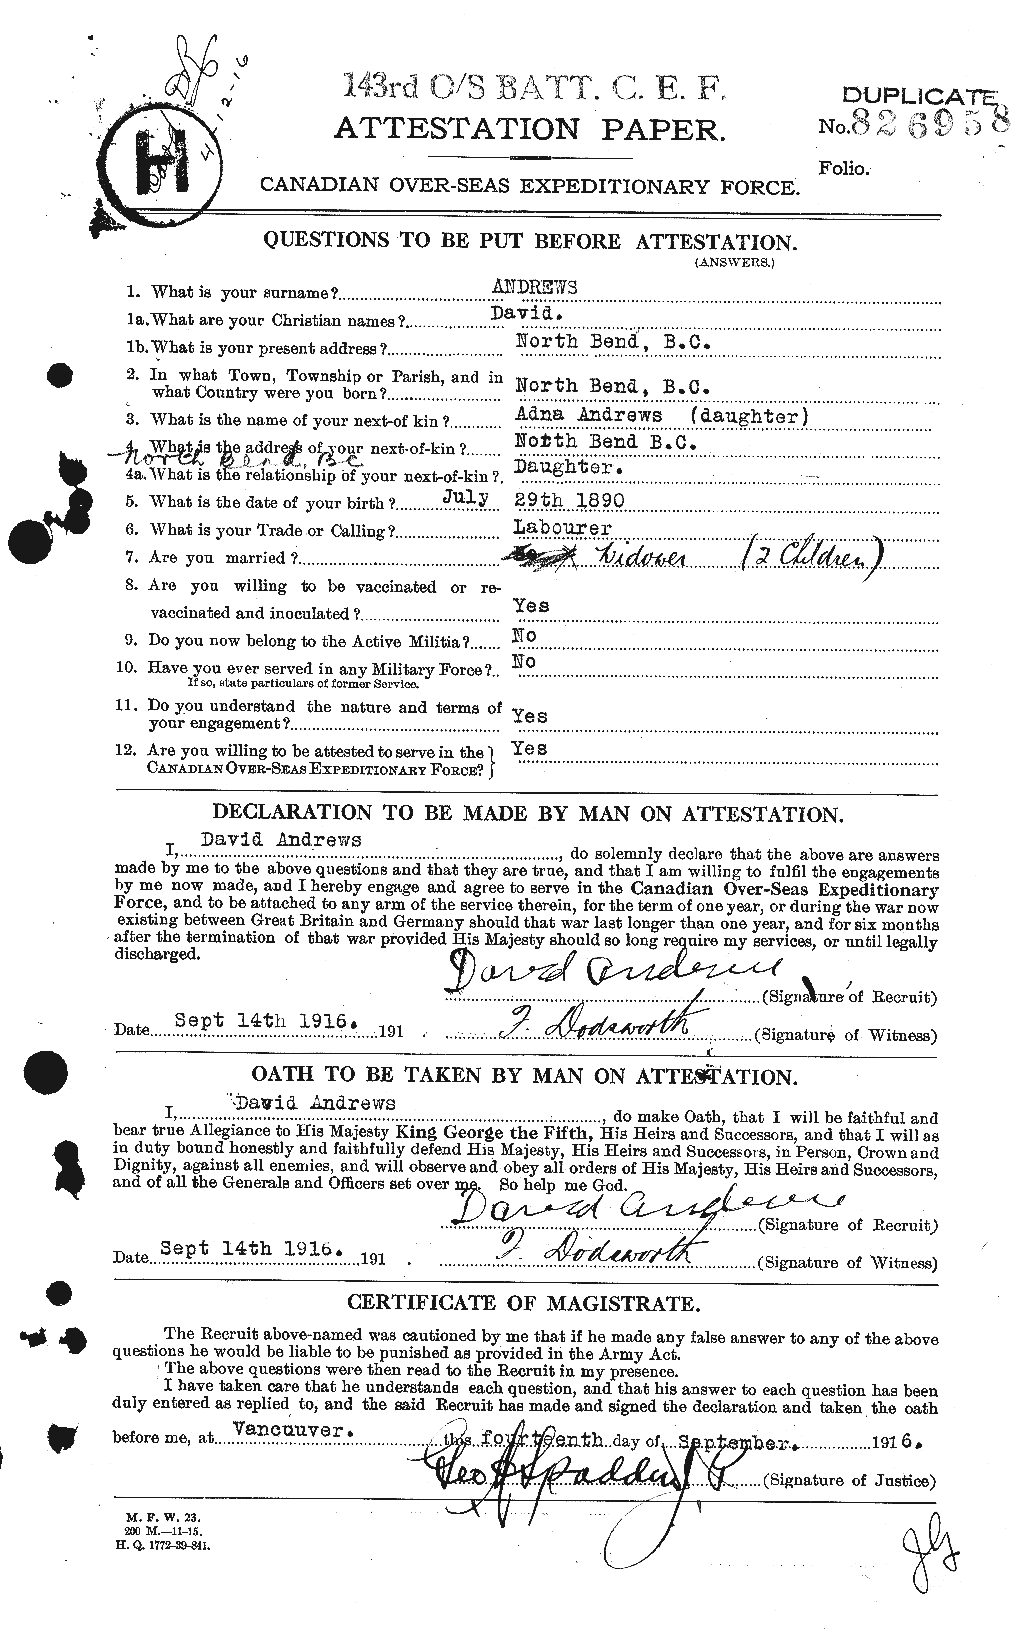 Personnel Records of the First World War - CEF 210397a